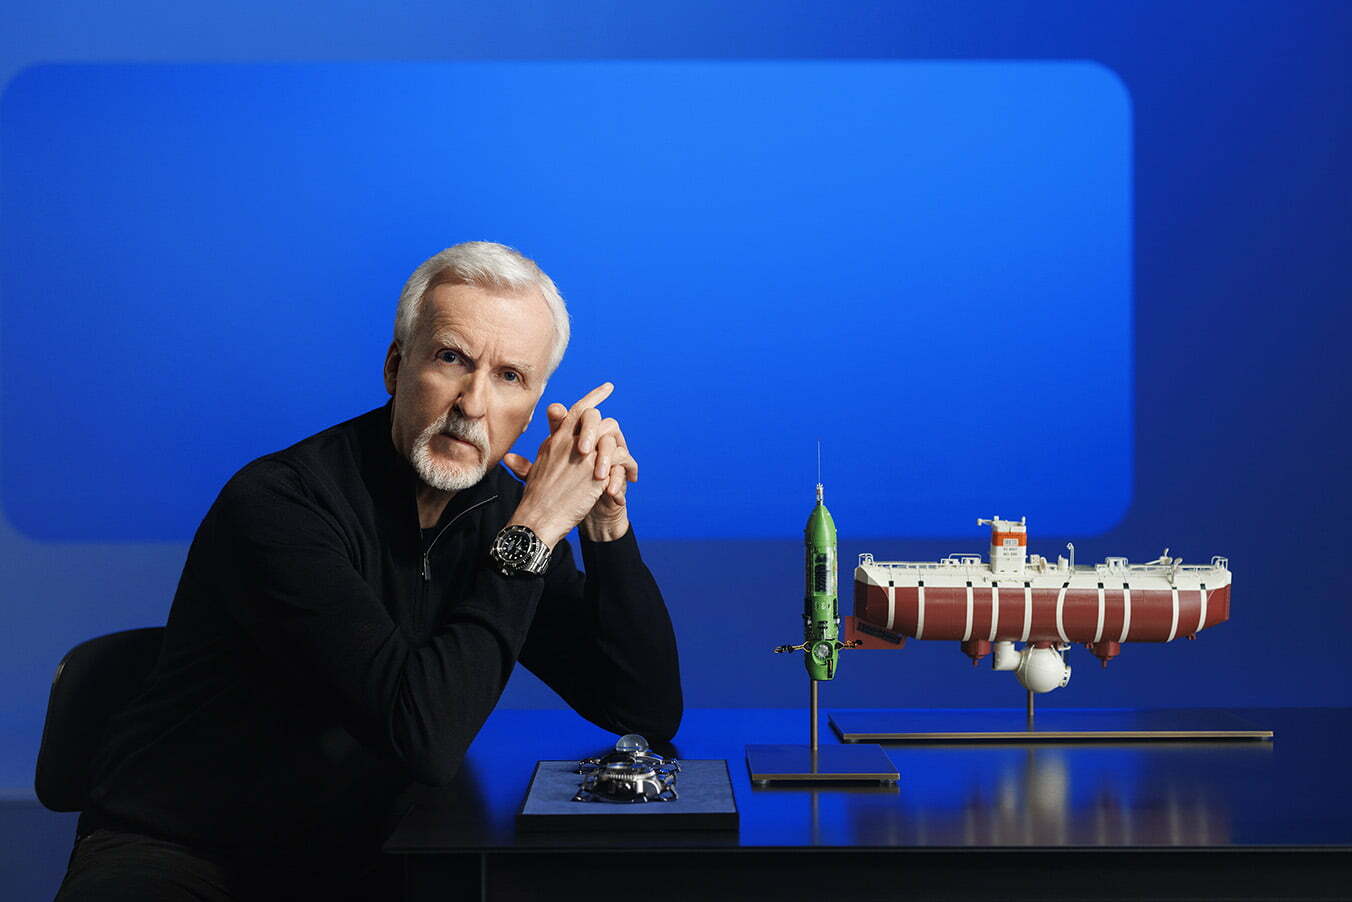 James Cameron, an Oyster Perpetual Deepsea Challenge on his wrist, posing with a model of the bathyscaphe Trieste (right), his submersible DEEPSEA CHALLENGER (center) and (left) the two experimental watches attached to the vehicles during the dives into the Mariana Trench - respectively, the Deep Sea Special (behind) and the Rolex Deepsea Challenge (in front).